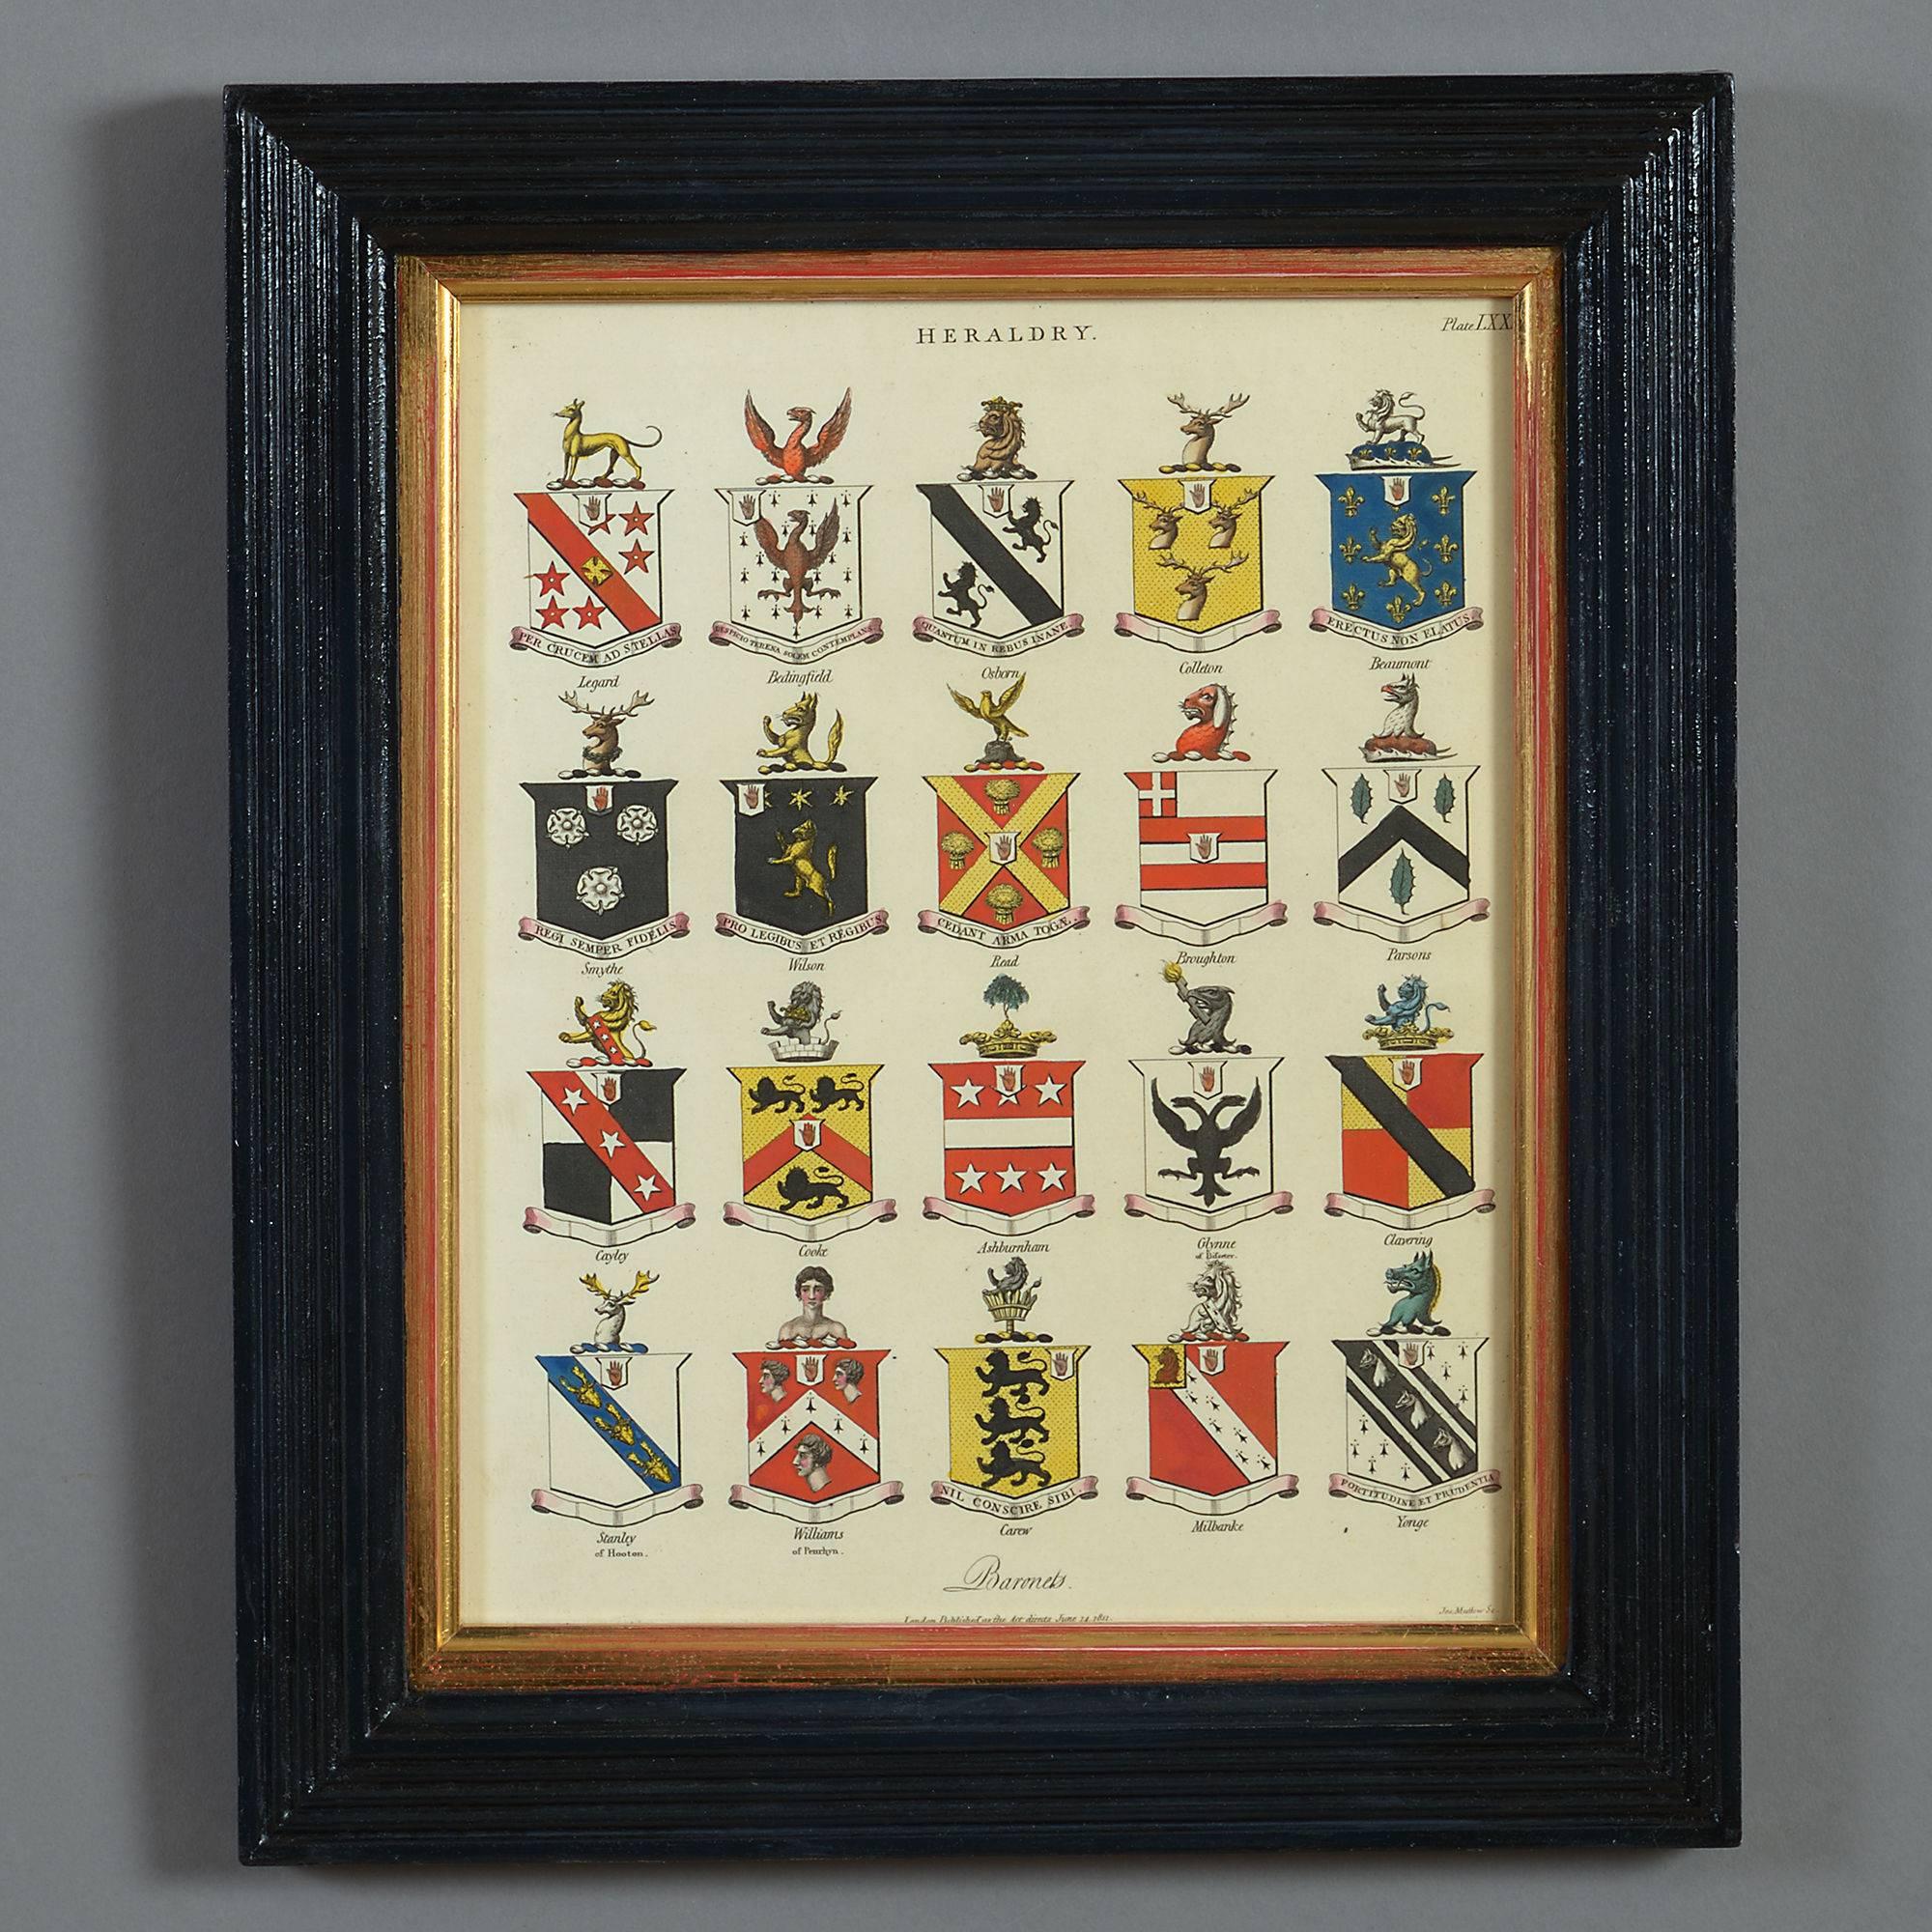 A set of six hand colored heraldic engravings depicting the arms of Esquires and Gentlemen of England, circa 1815 

For the last thousand years, European nobles and gentlemen have borne arms: lavishly colourful shields emblazoned with stylised